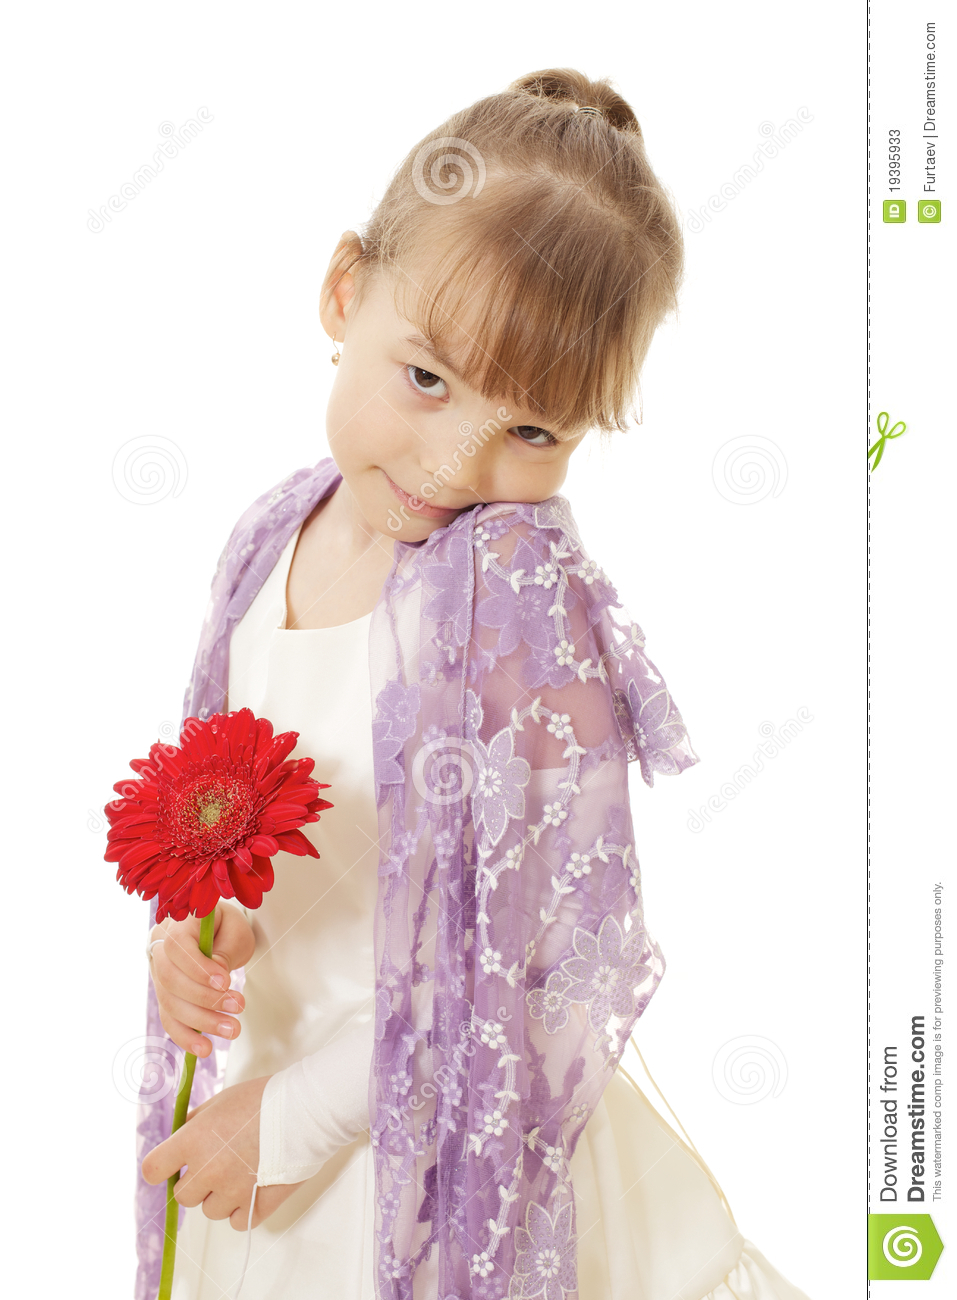 Shy Little Girl In Dress Holding Red Flower Stock Photos   Image